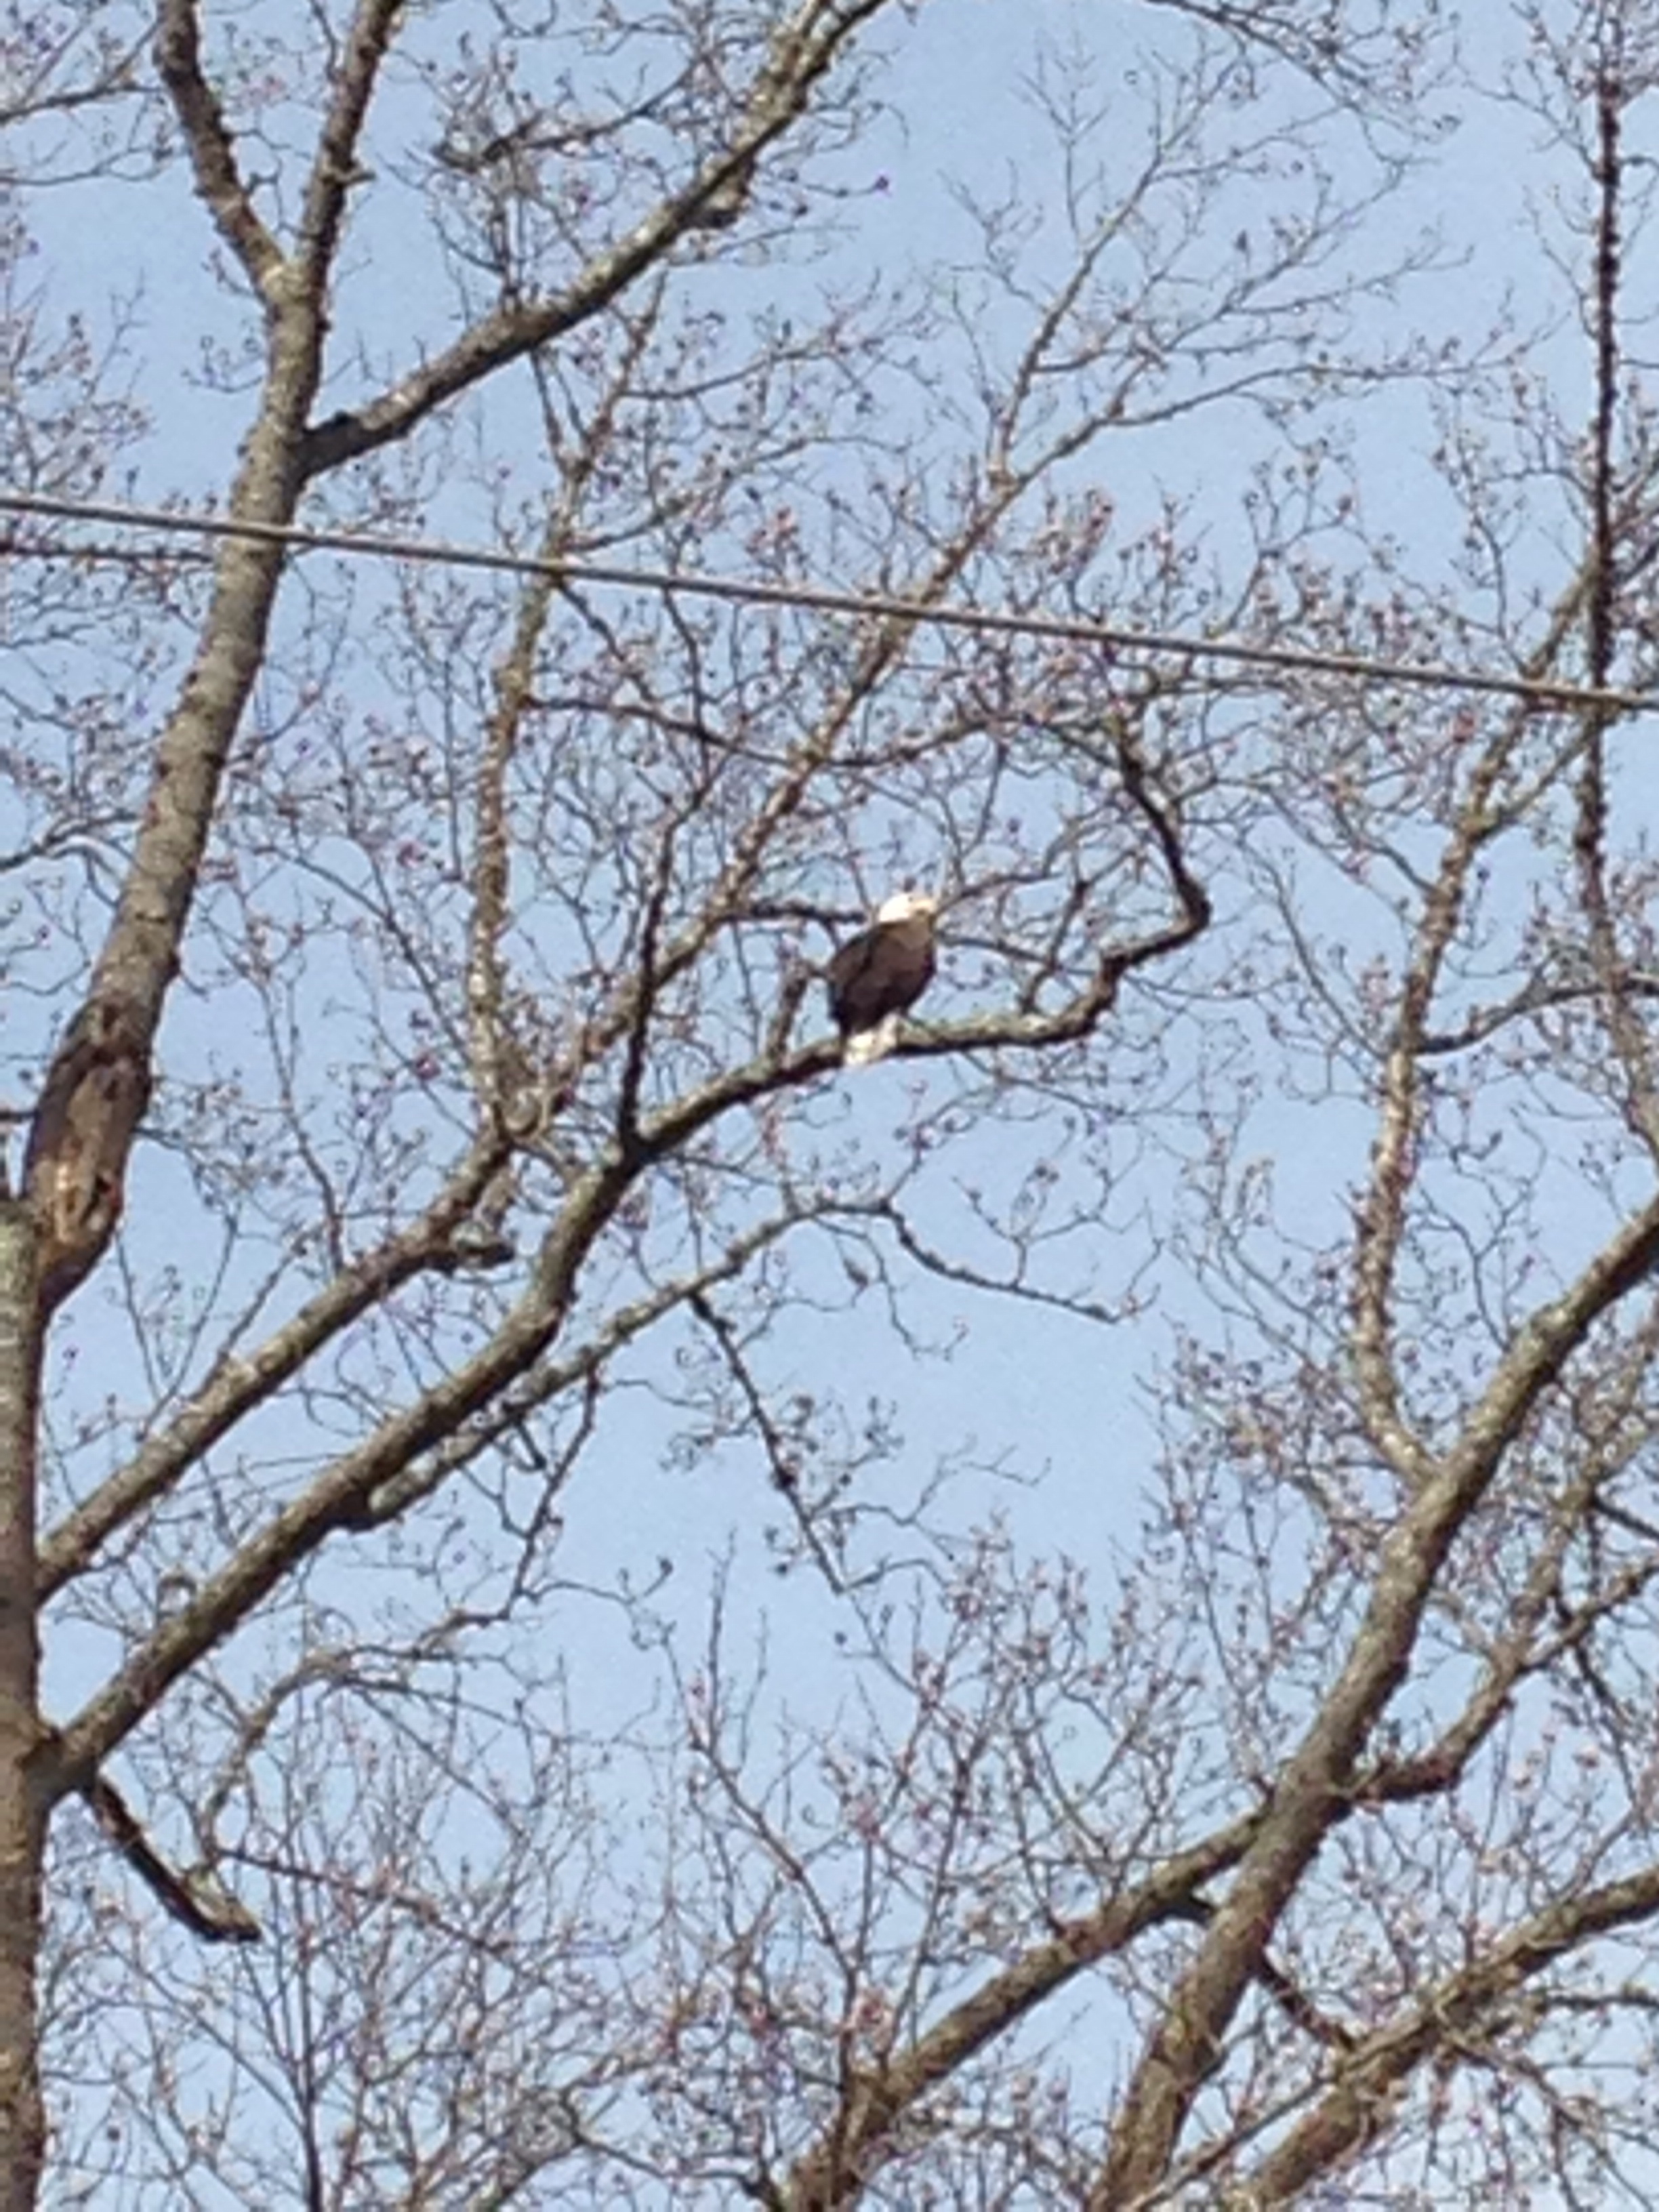 The best shot of the wild bald eagle I could get with my camera phone.